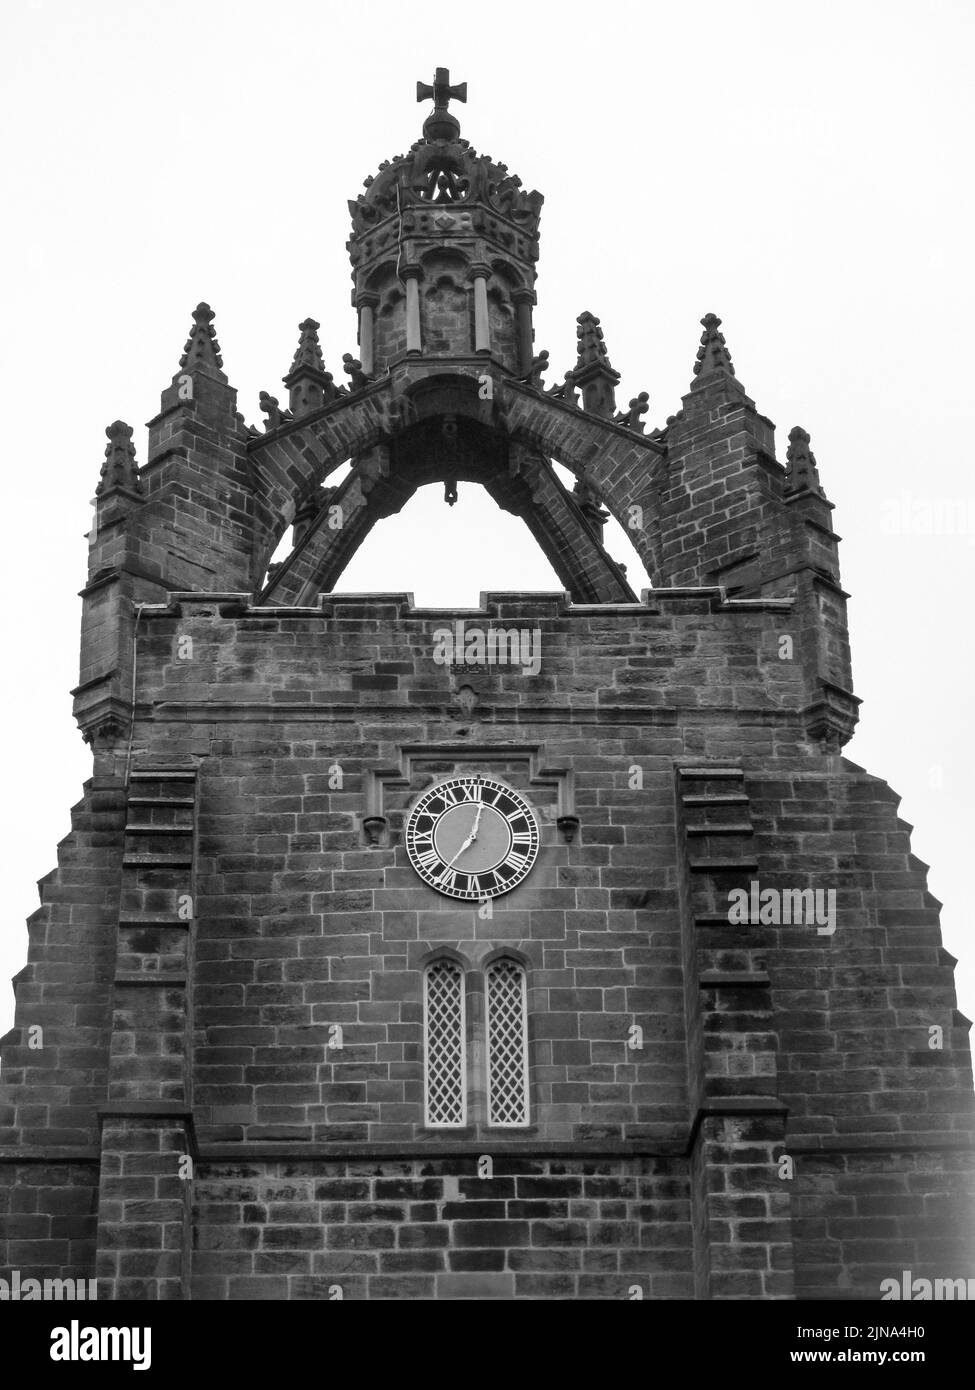 The Architectural imperial crown on top of the Chapel of Kings collage in Aberdeen Scotland, in Black and white. The Imperial crown on the top of the Stock Photo